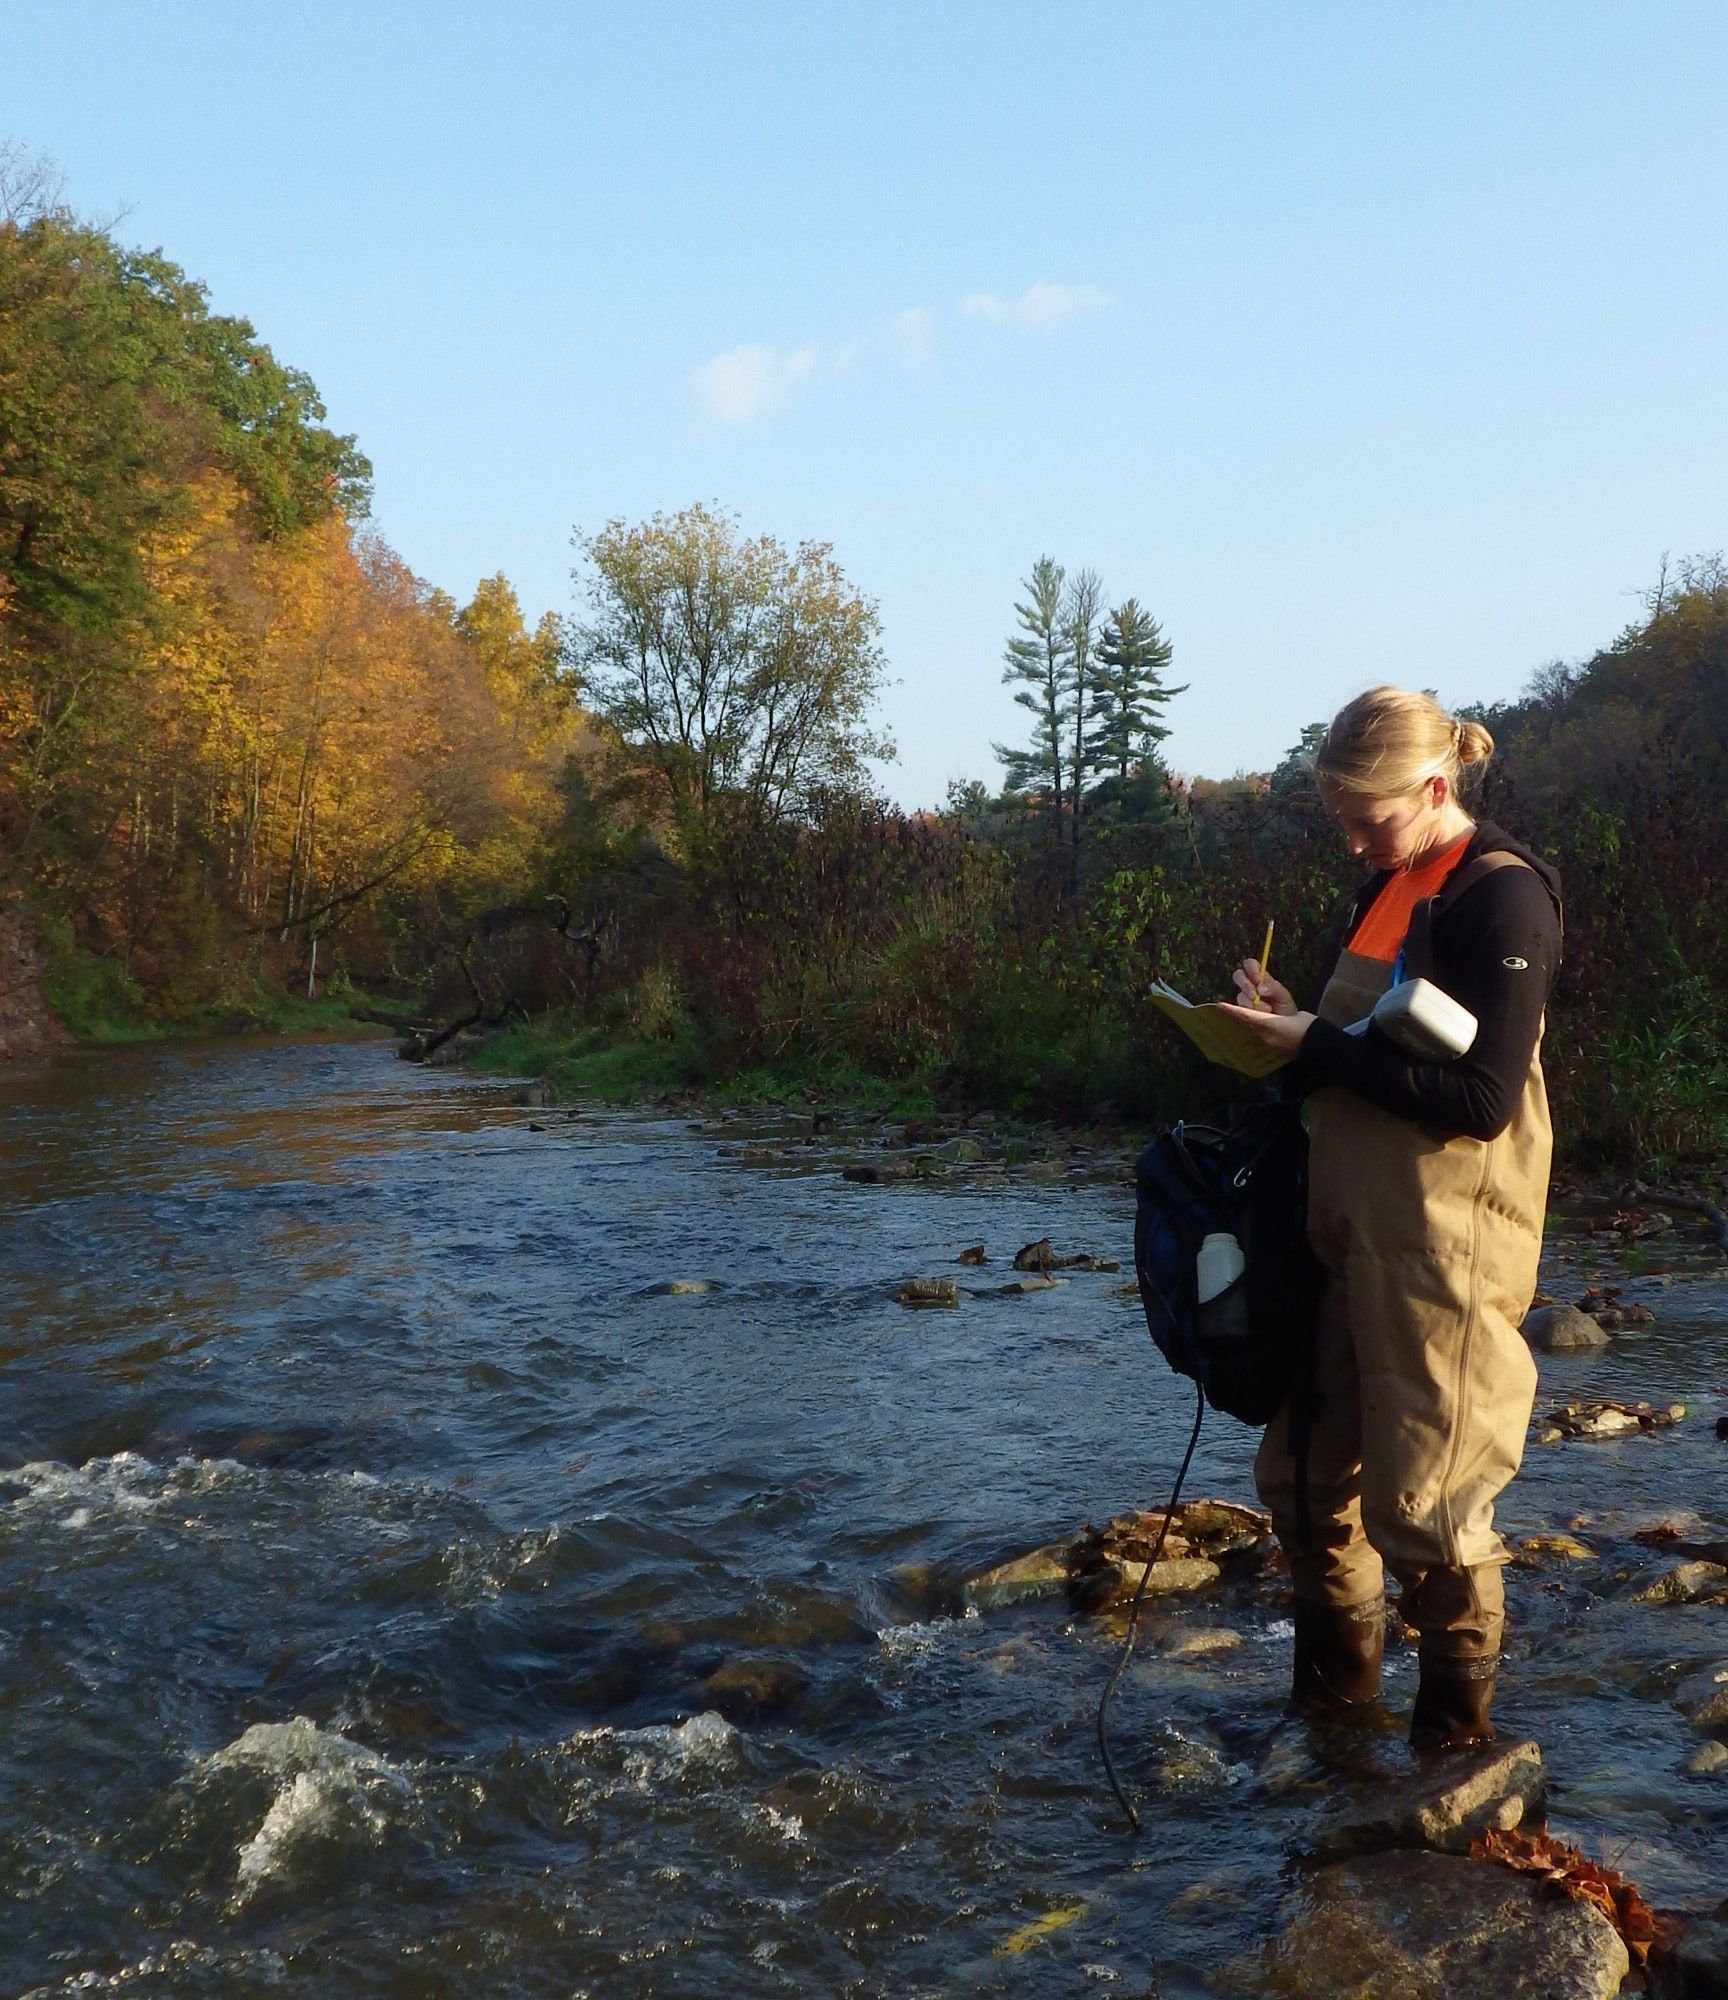 A woman in chest waders stands in the middle of a stream taking notes while holding a YSI meter that is in the water